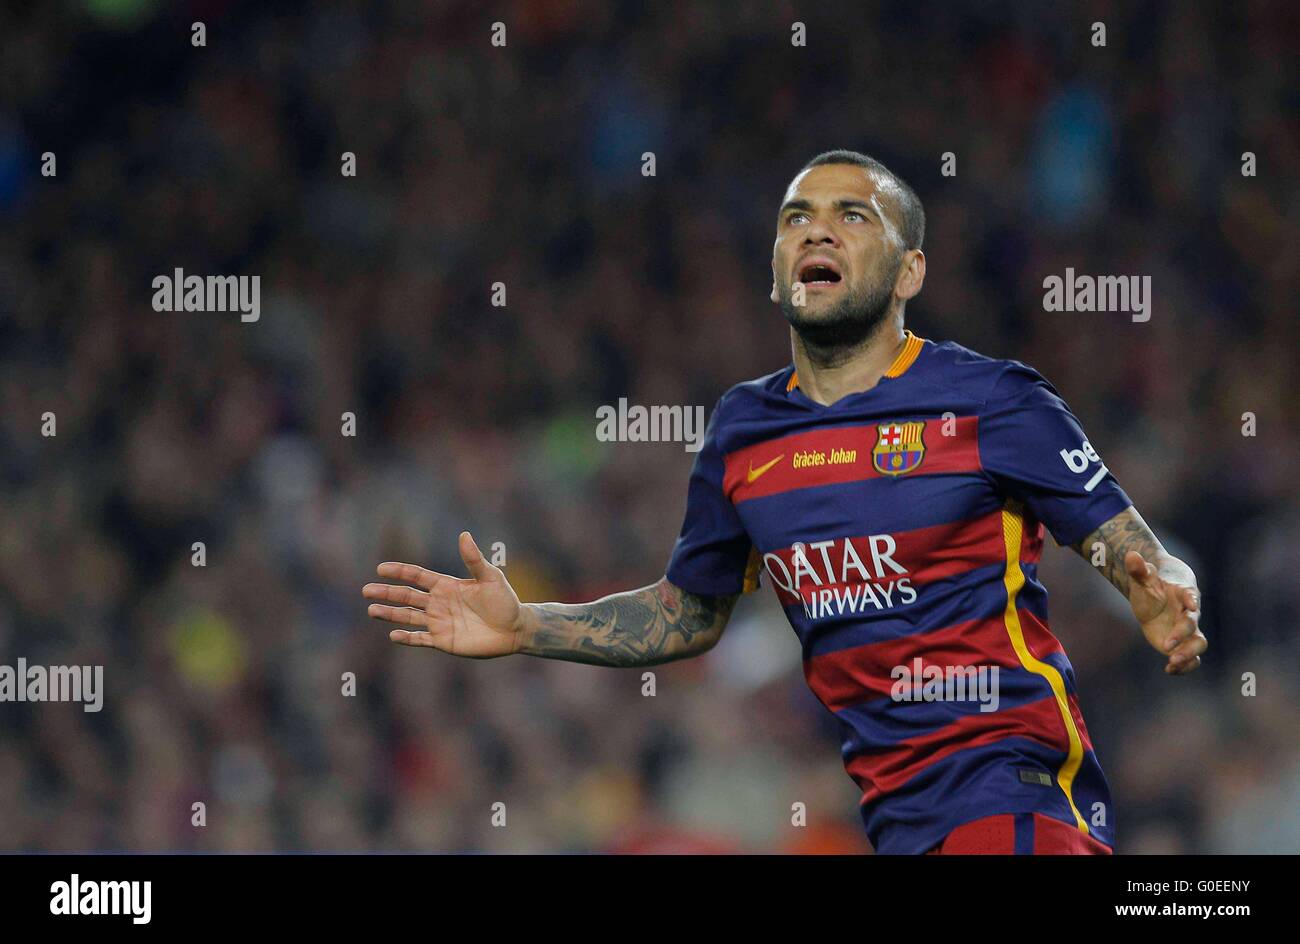 Dani alves barcelona hi-res stock photography and images - Alamy